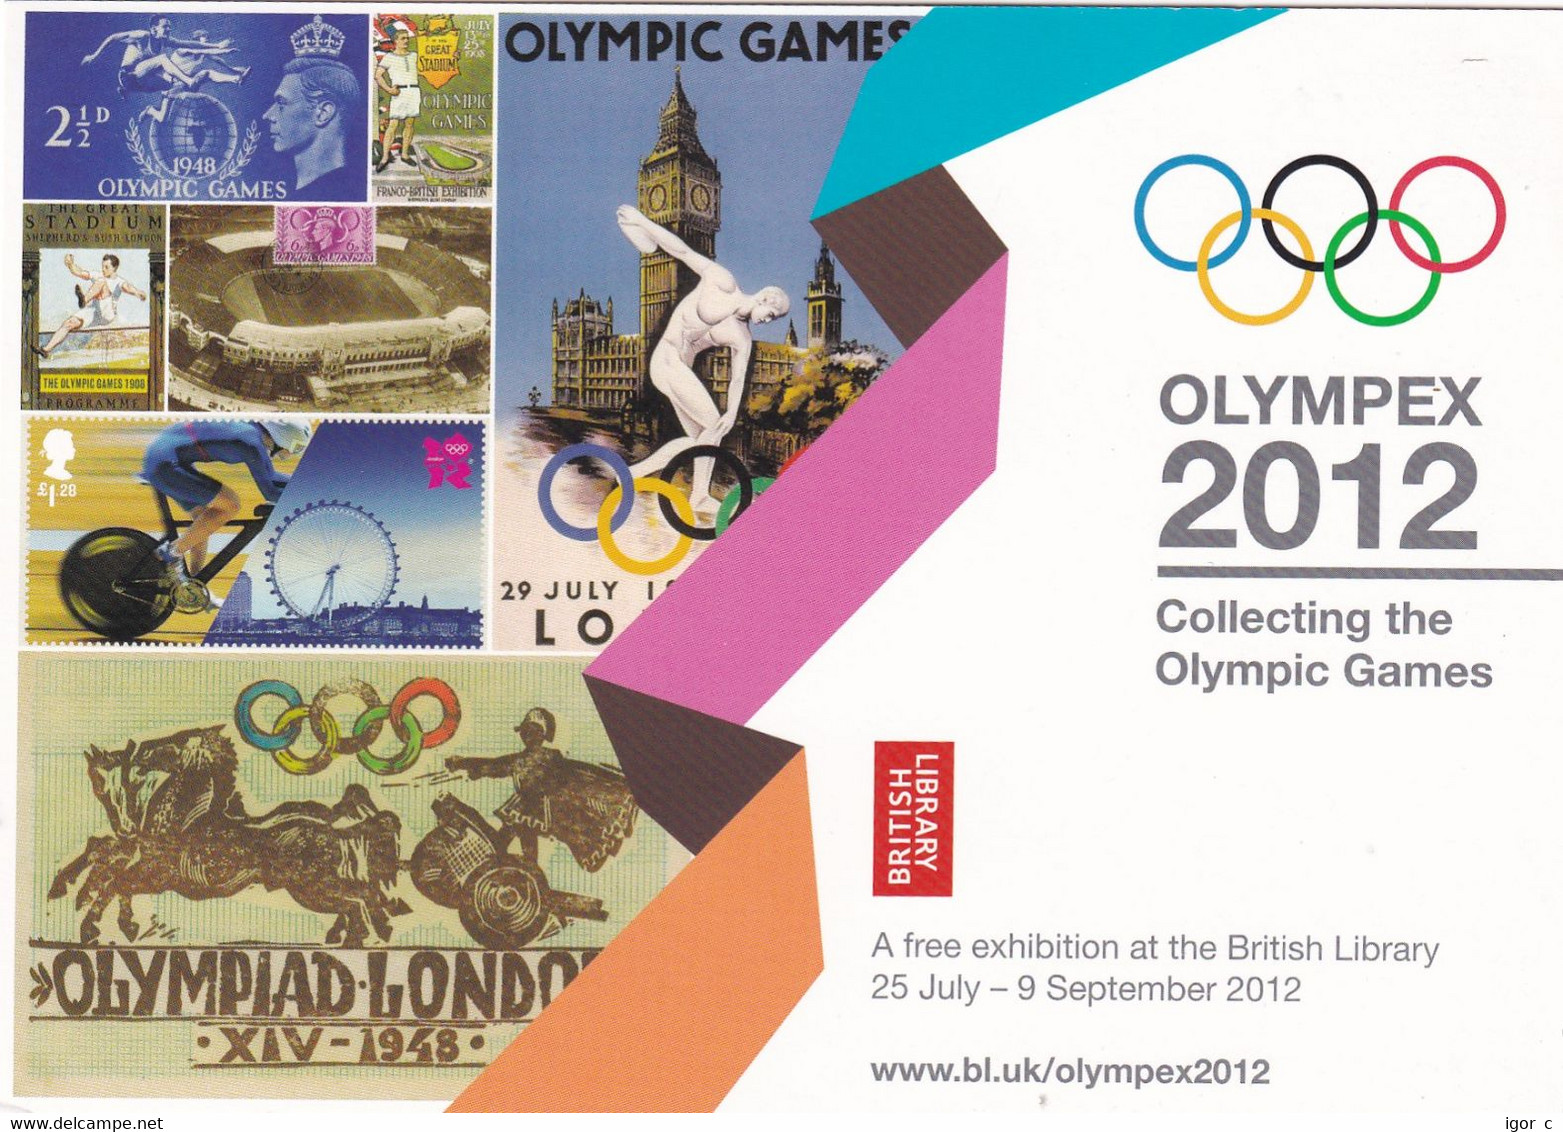 United Kingdom UK 2012 Card: Olympic Games London; Olympex 2012 STADION E20 CANCELLATION; Diving; Chatiot Race Cycling - Summer 2028: Los Angeles